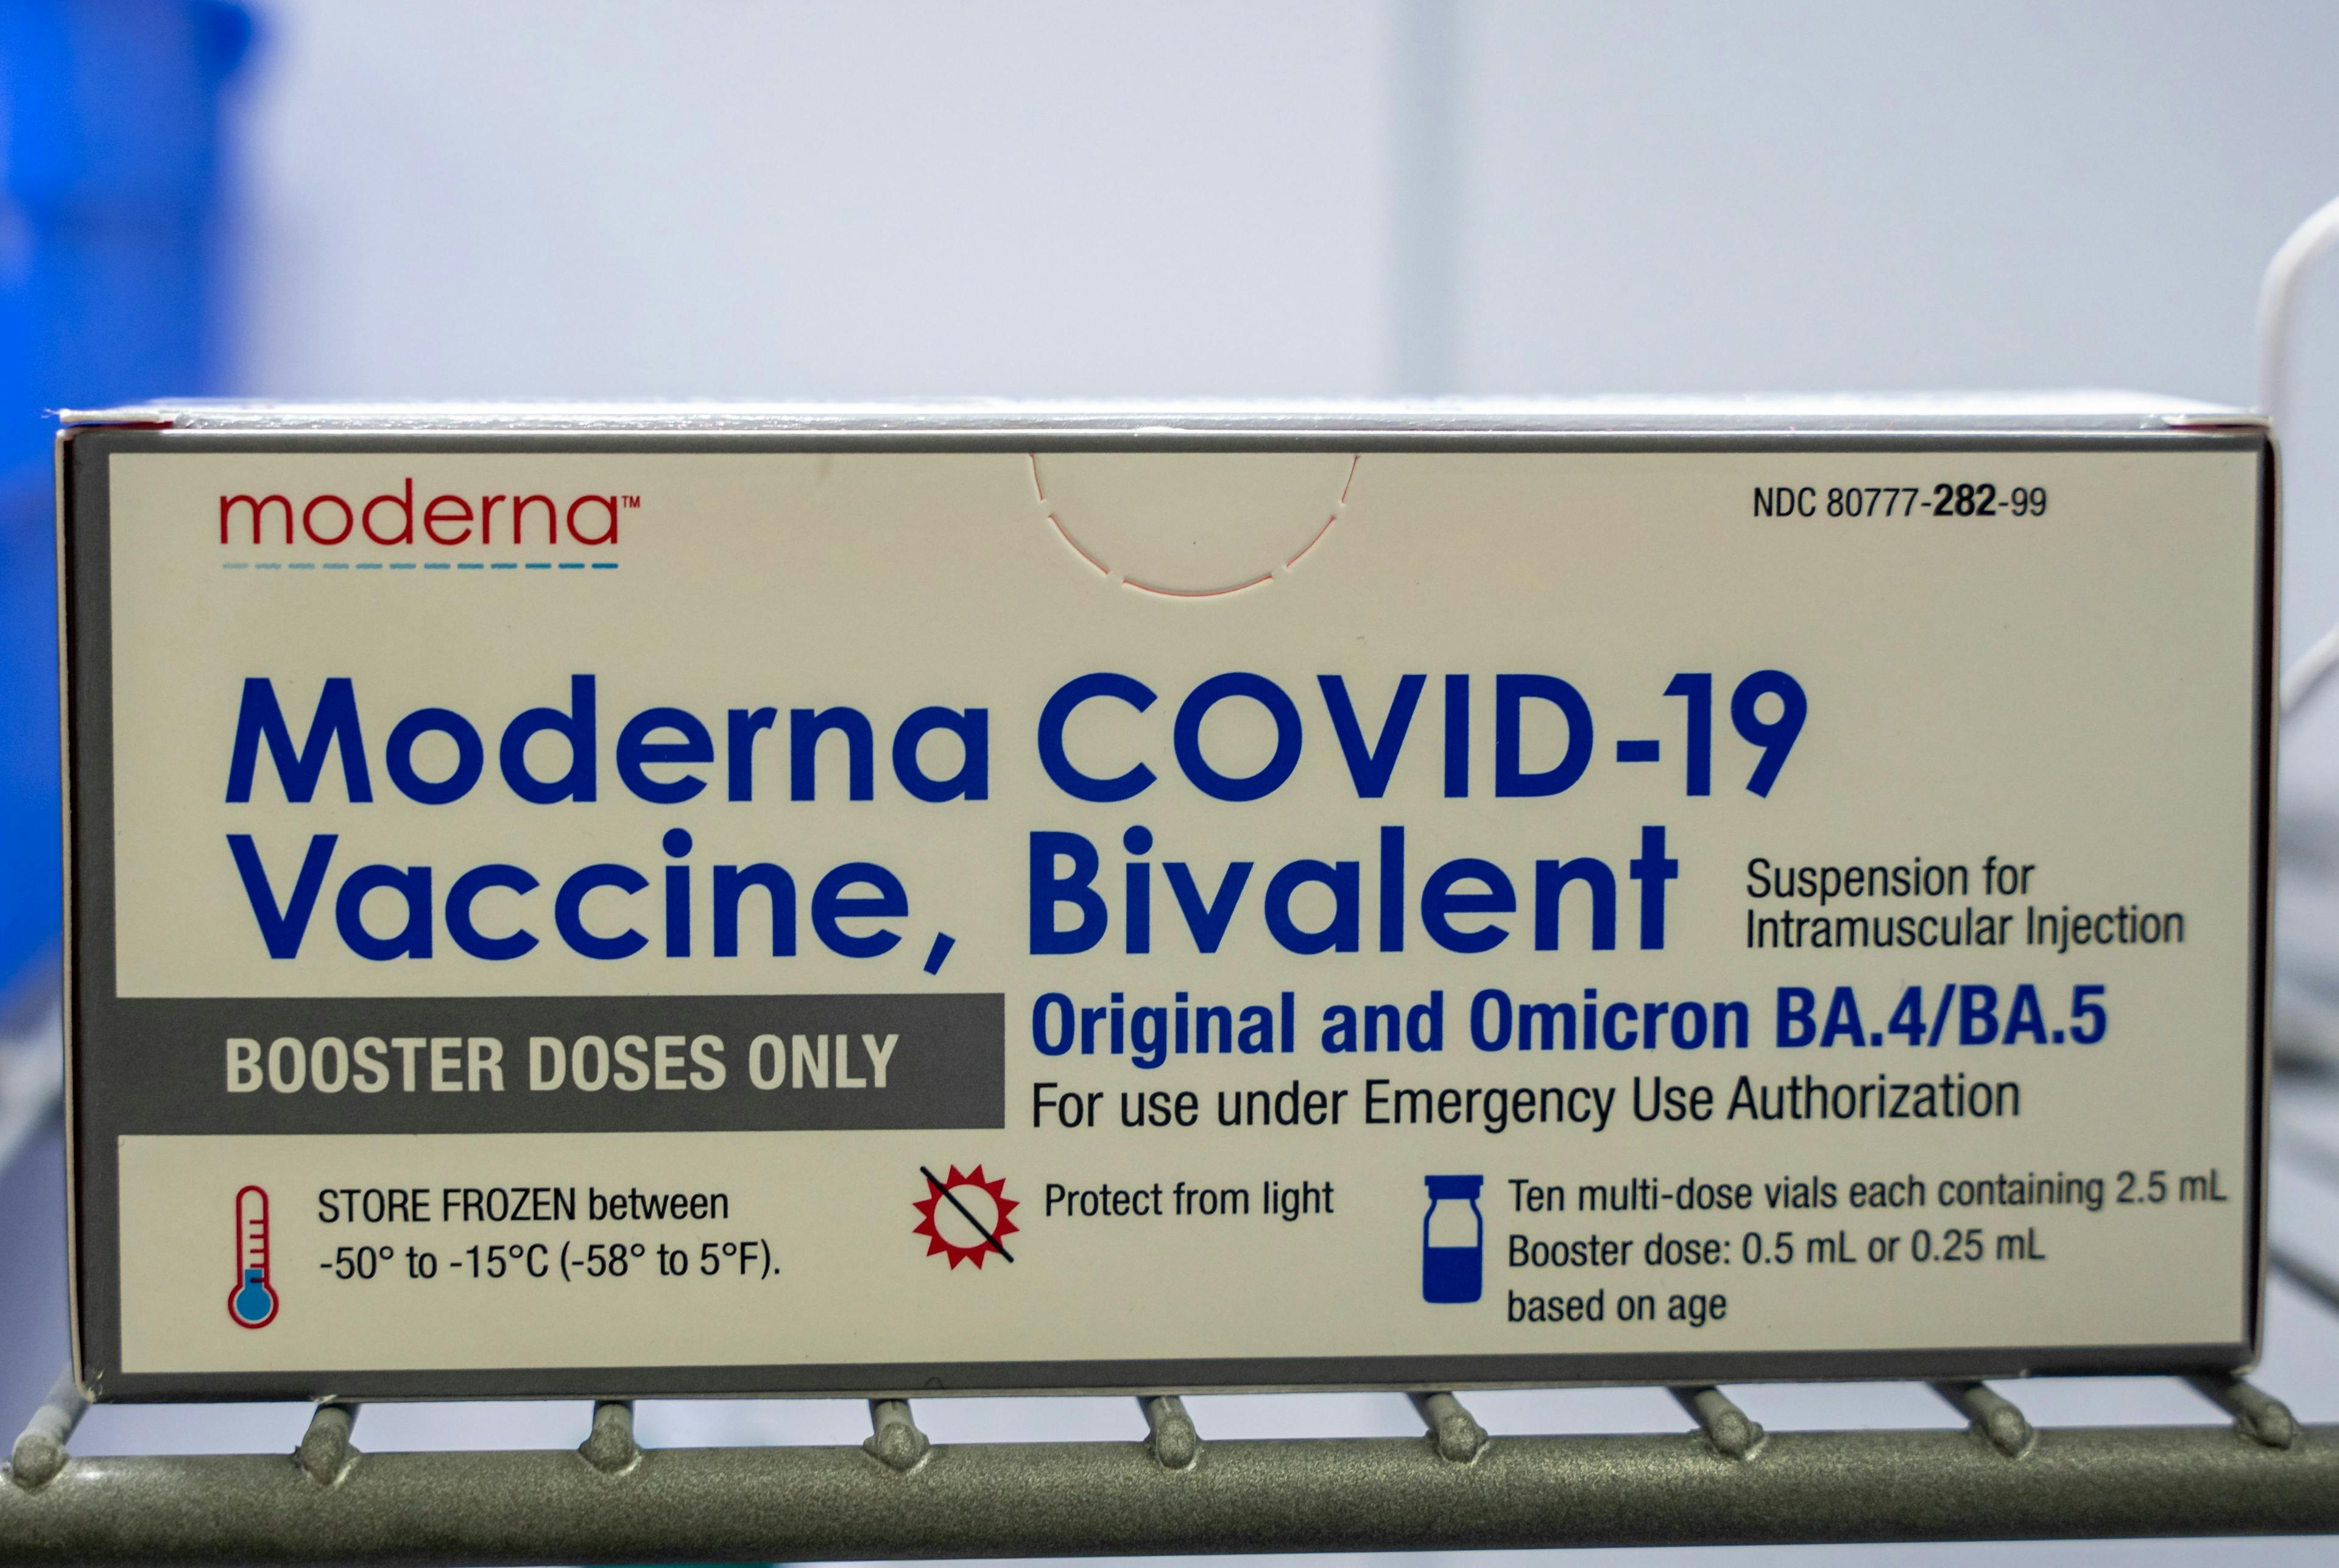 There has been a low uptake of bivalent mRNA booster vaccines in older adults, despite a high efficacy of preventing severe and fatal COVID-19.